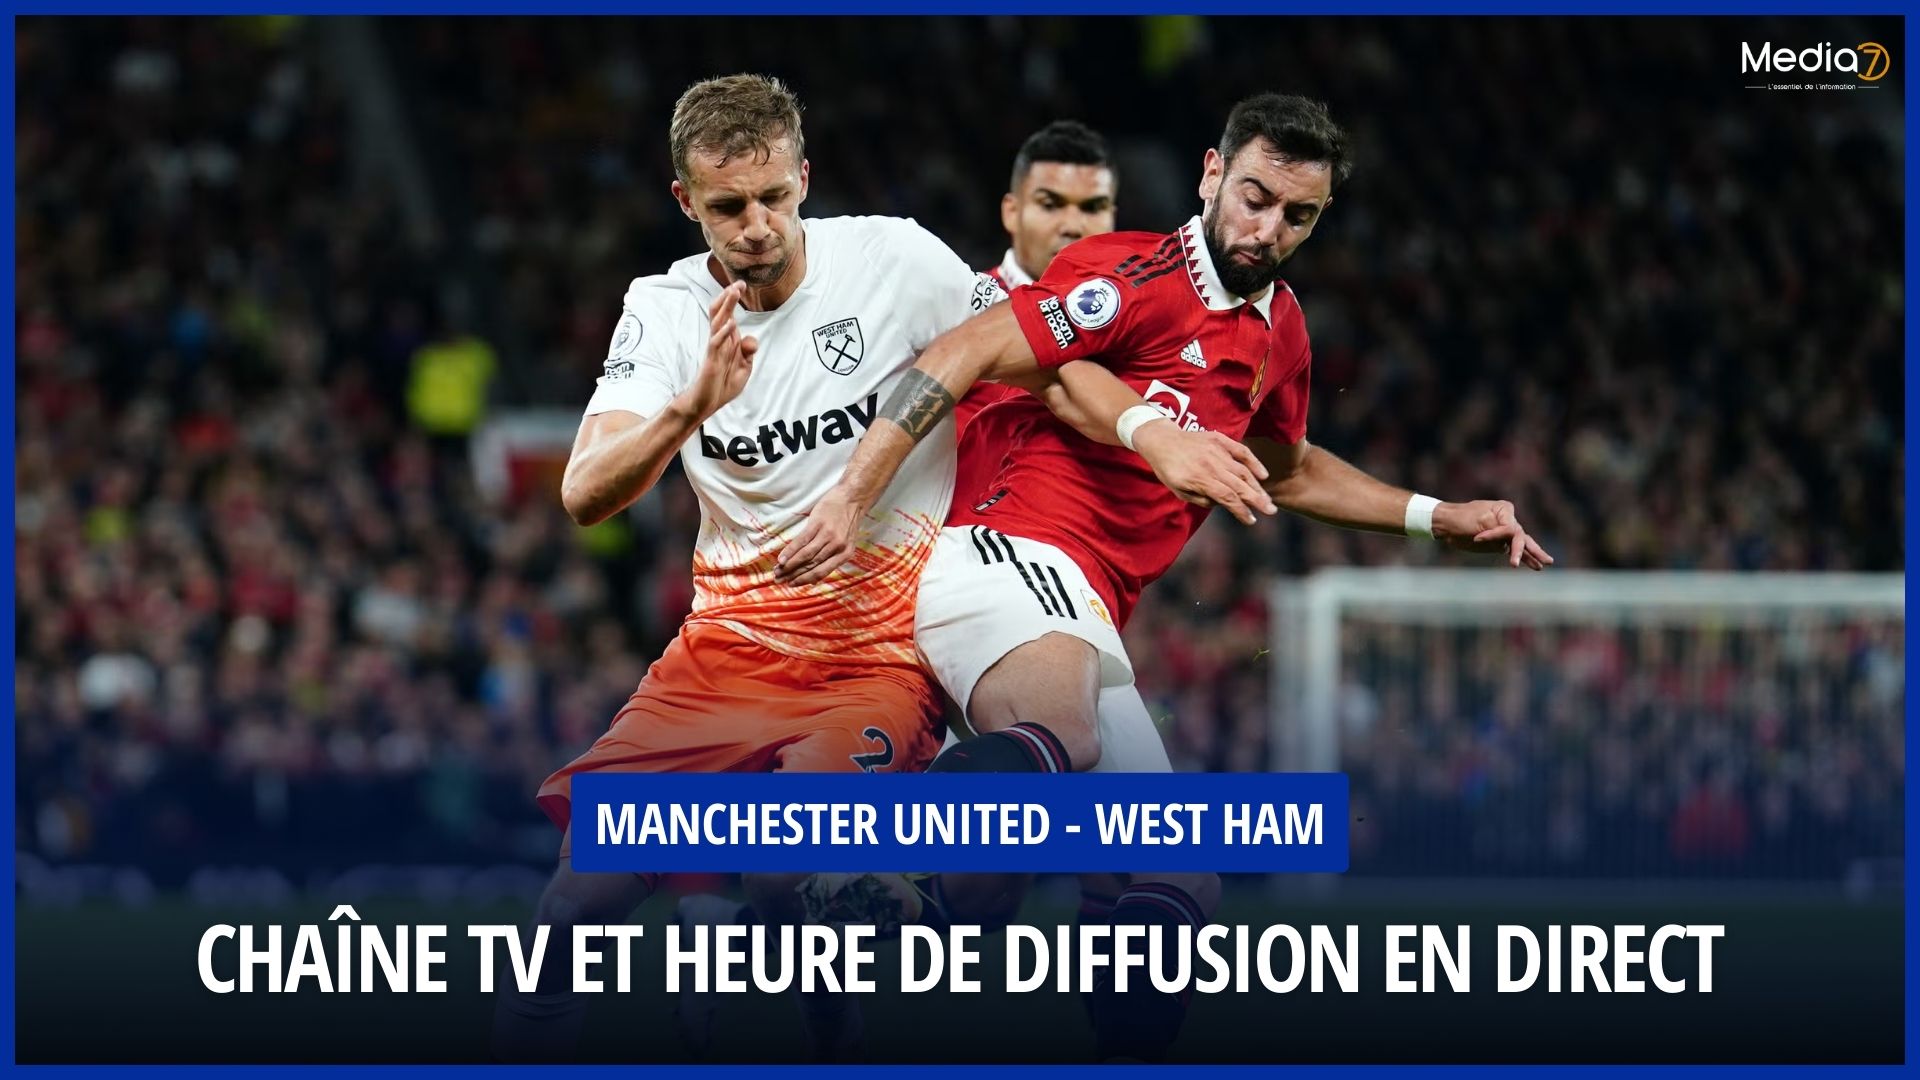 Broadcast of the Manchester United - West Ham Match live: Times and TV Channel - Media7